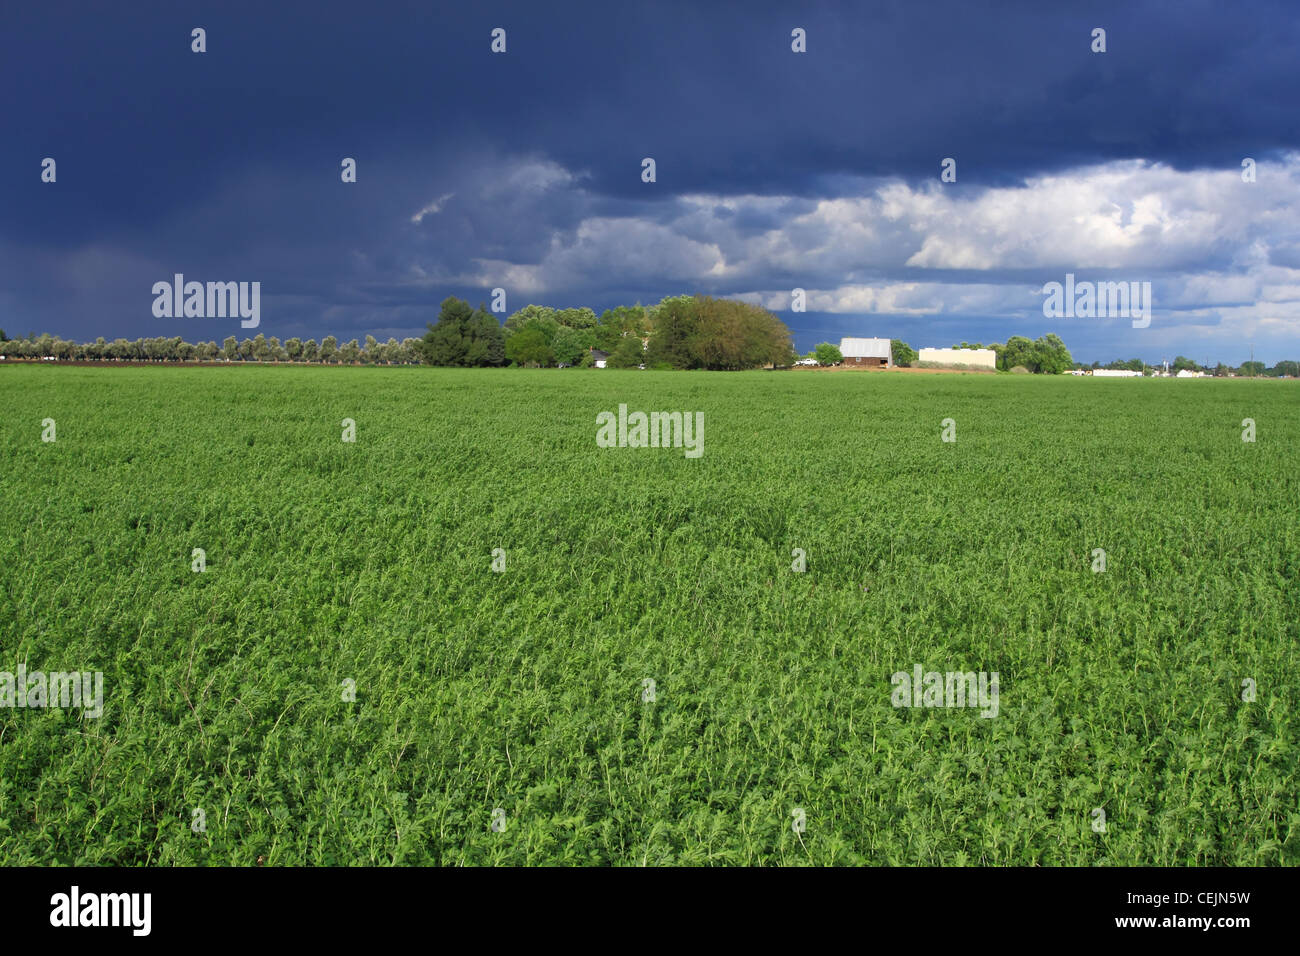 Agriculture - Mature field of alfalfa after a Spring storm with storm clouds in the background / California, USA. Stock Photo